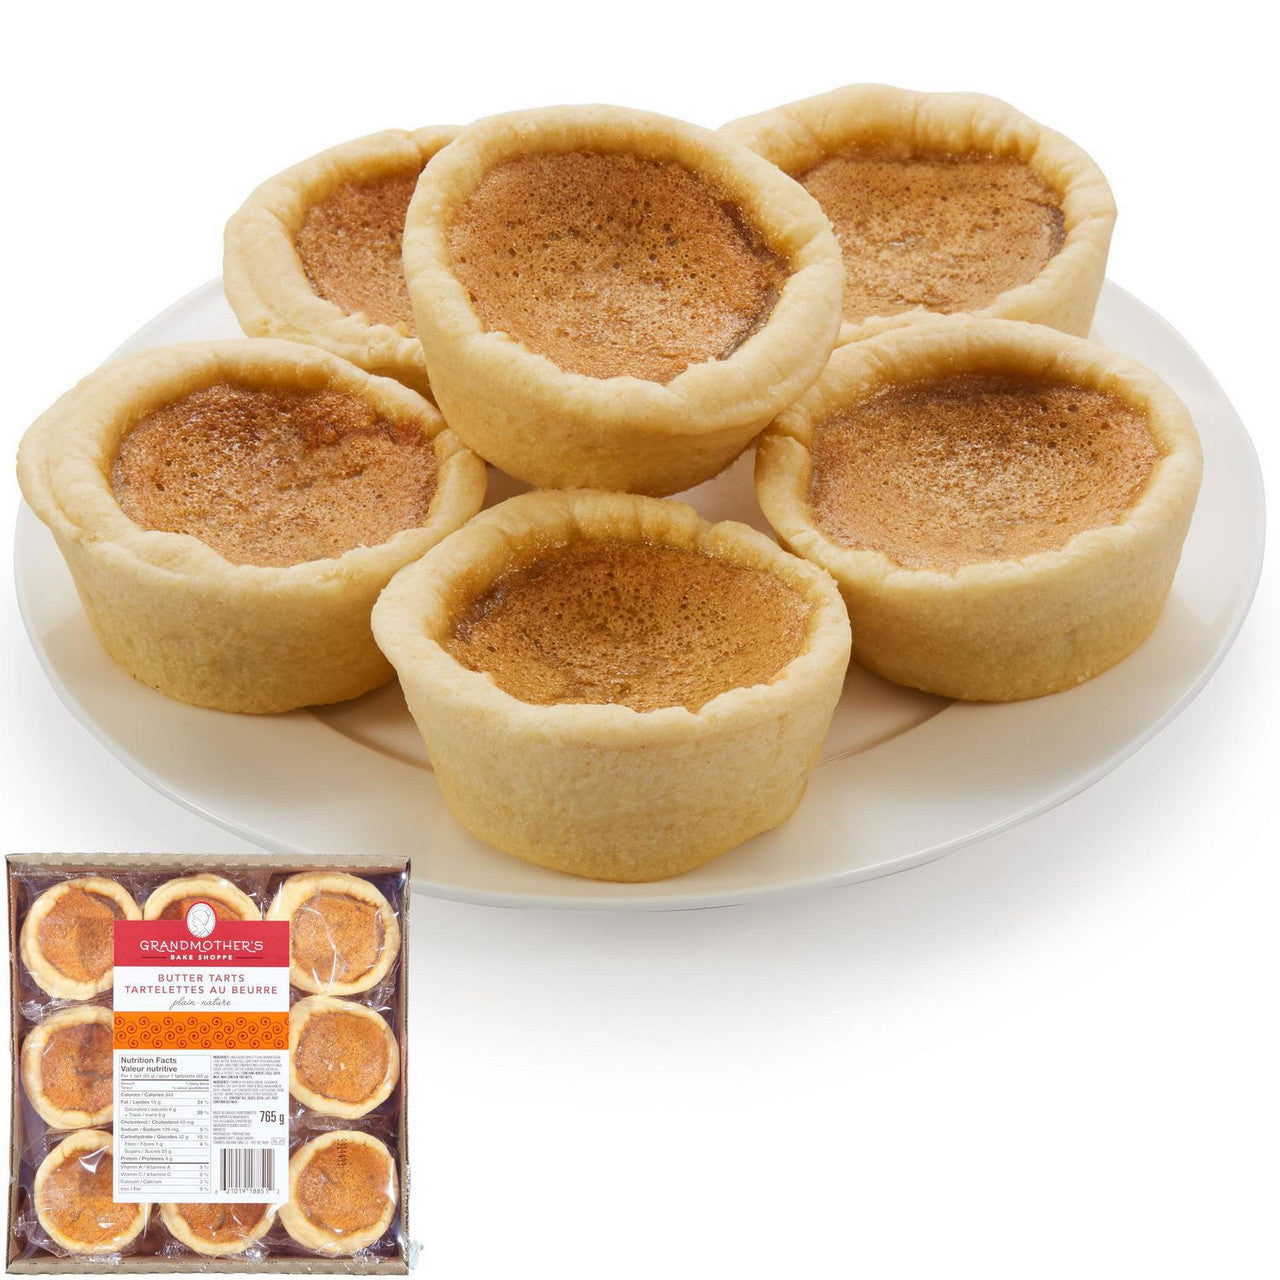 Grandmother's Bake Shoppe Plain Butter Tarts, 765g/27oz., {Imported from Canada}